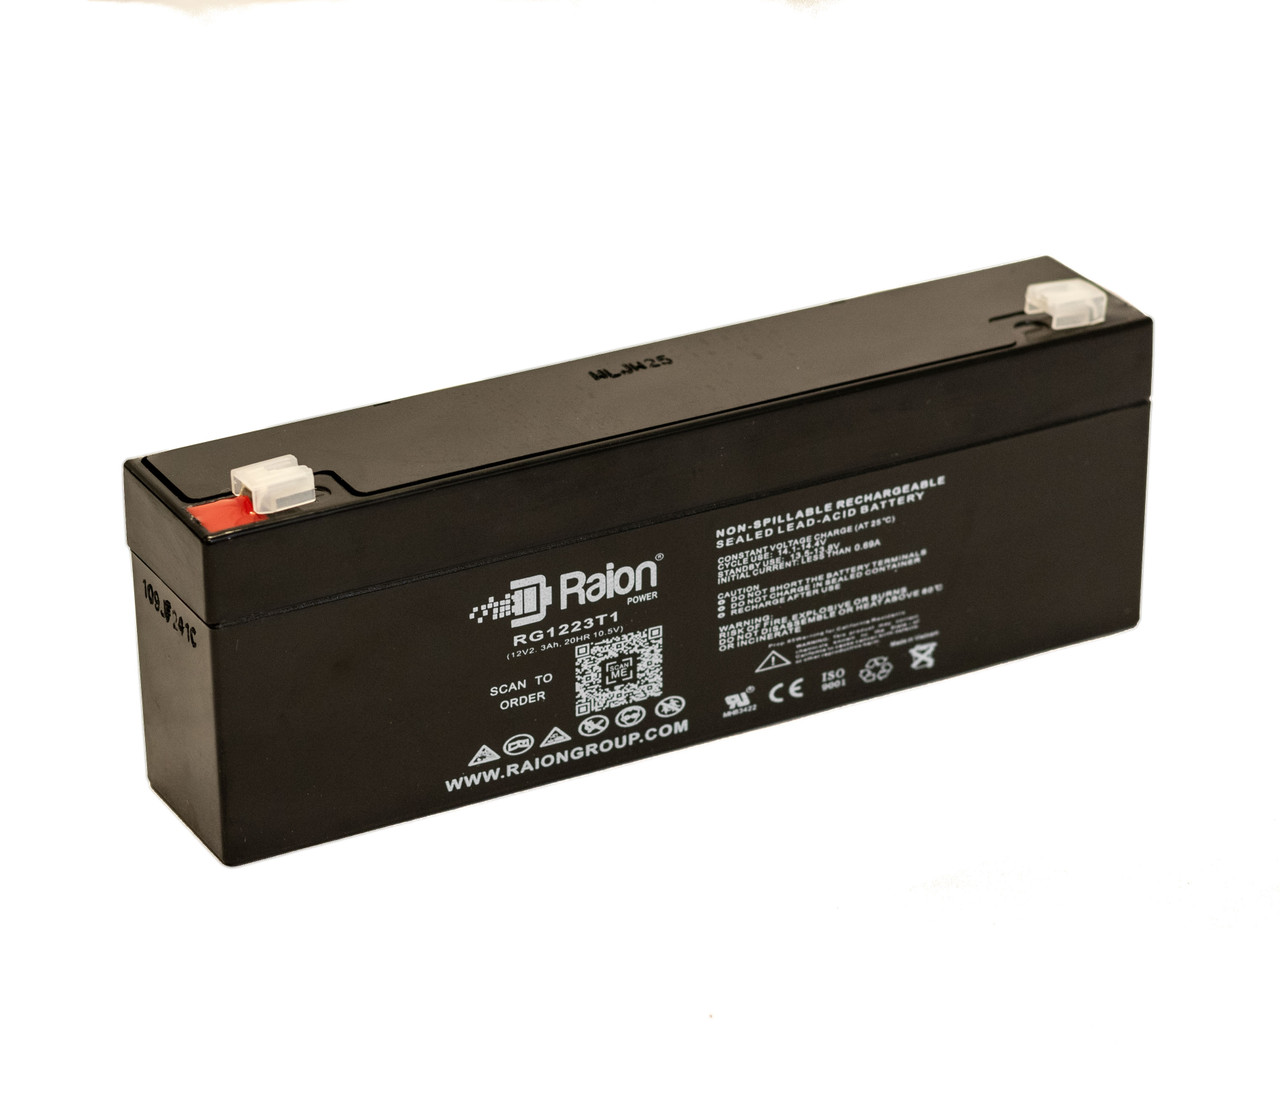 Raion Power RG1223T1 Replacement Battery for Life Science LS24 Monitor